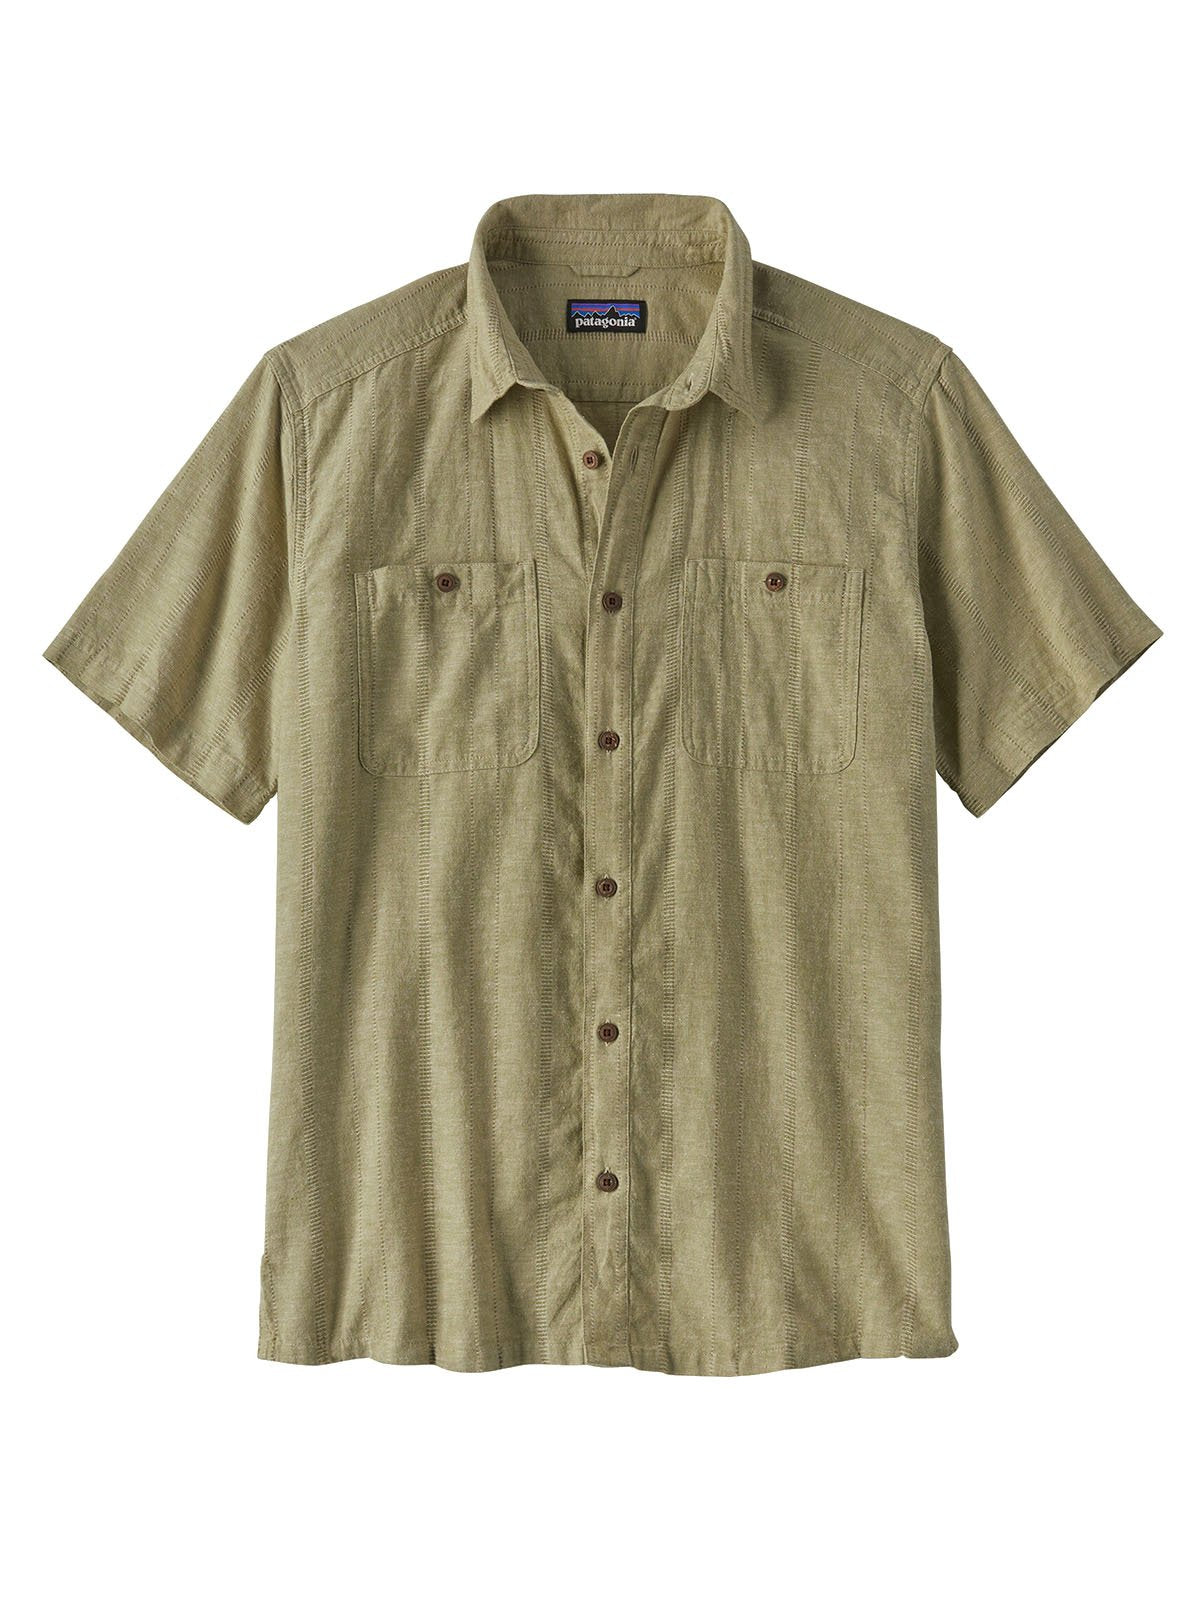 Camicie casual Uomo Patagonia - Men's Back Step Shirt - Beige